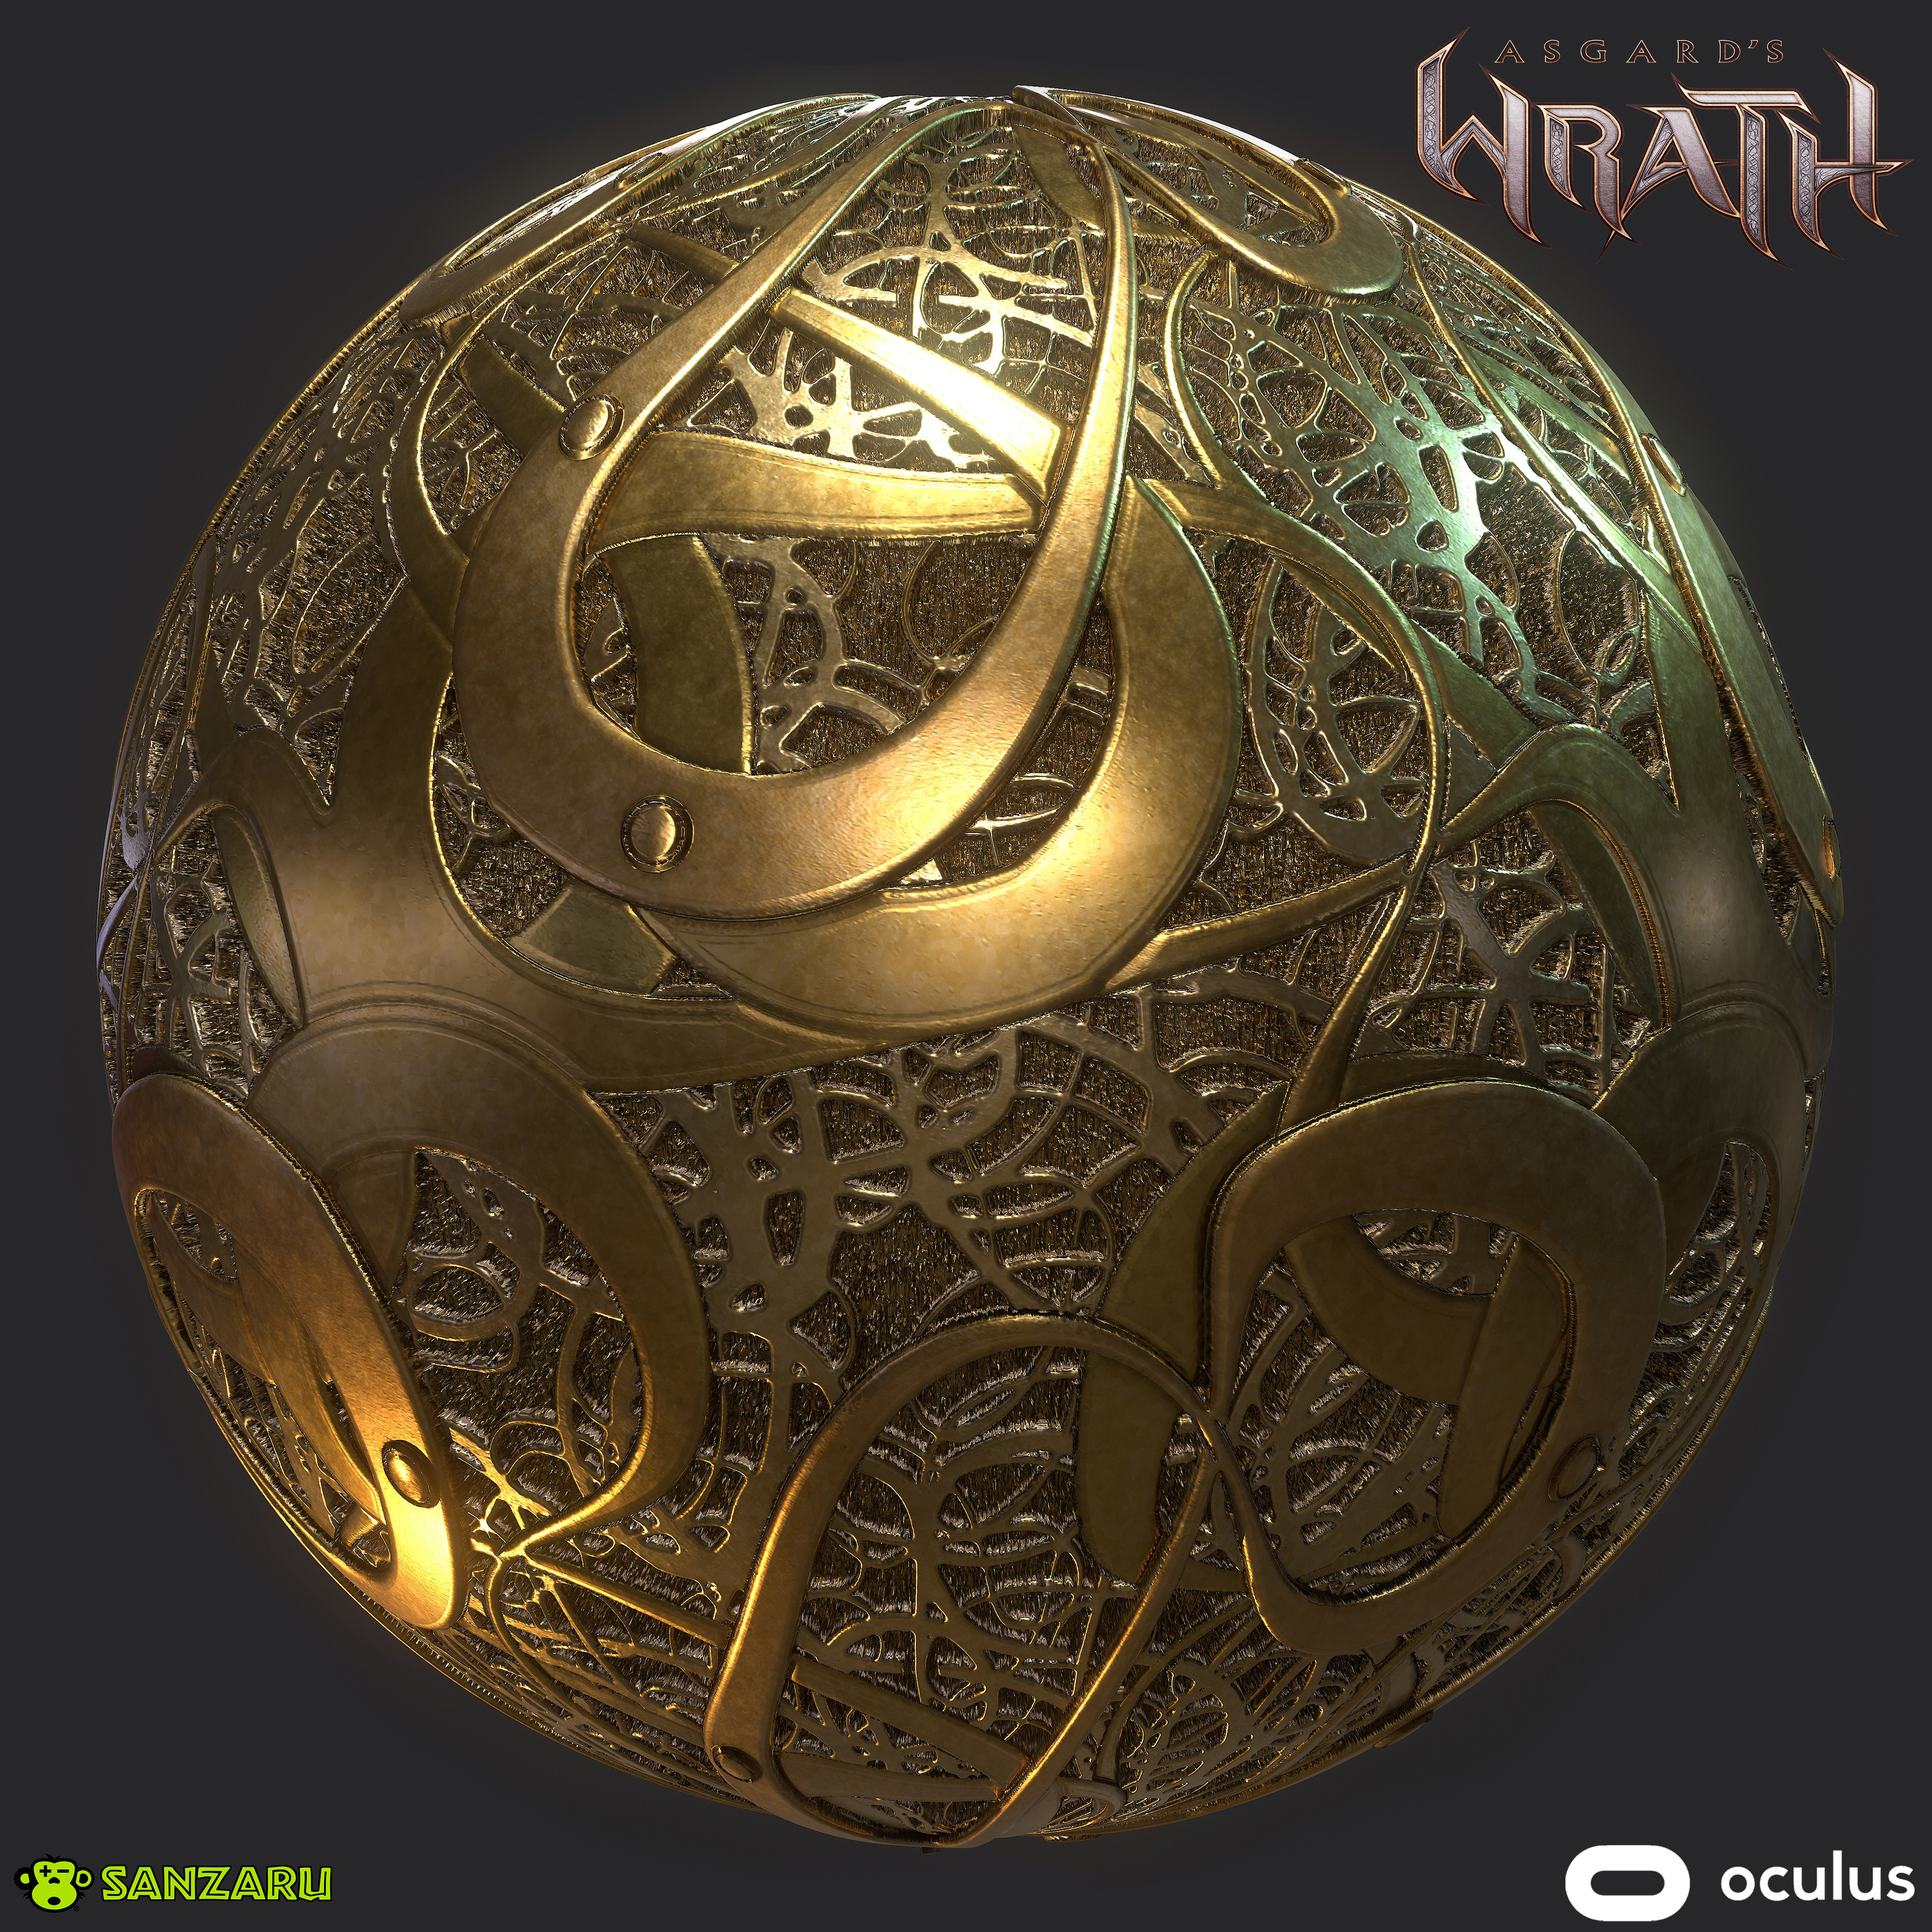 Tarnished Asgardian Gold Pattern- A large more ornate gold pattern used variously in the Asgardian Structures across the game.